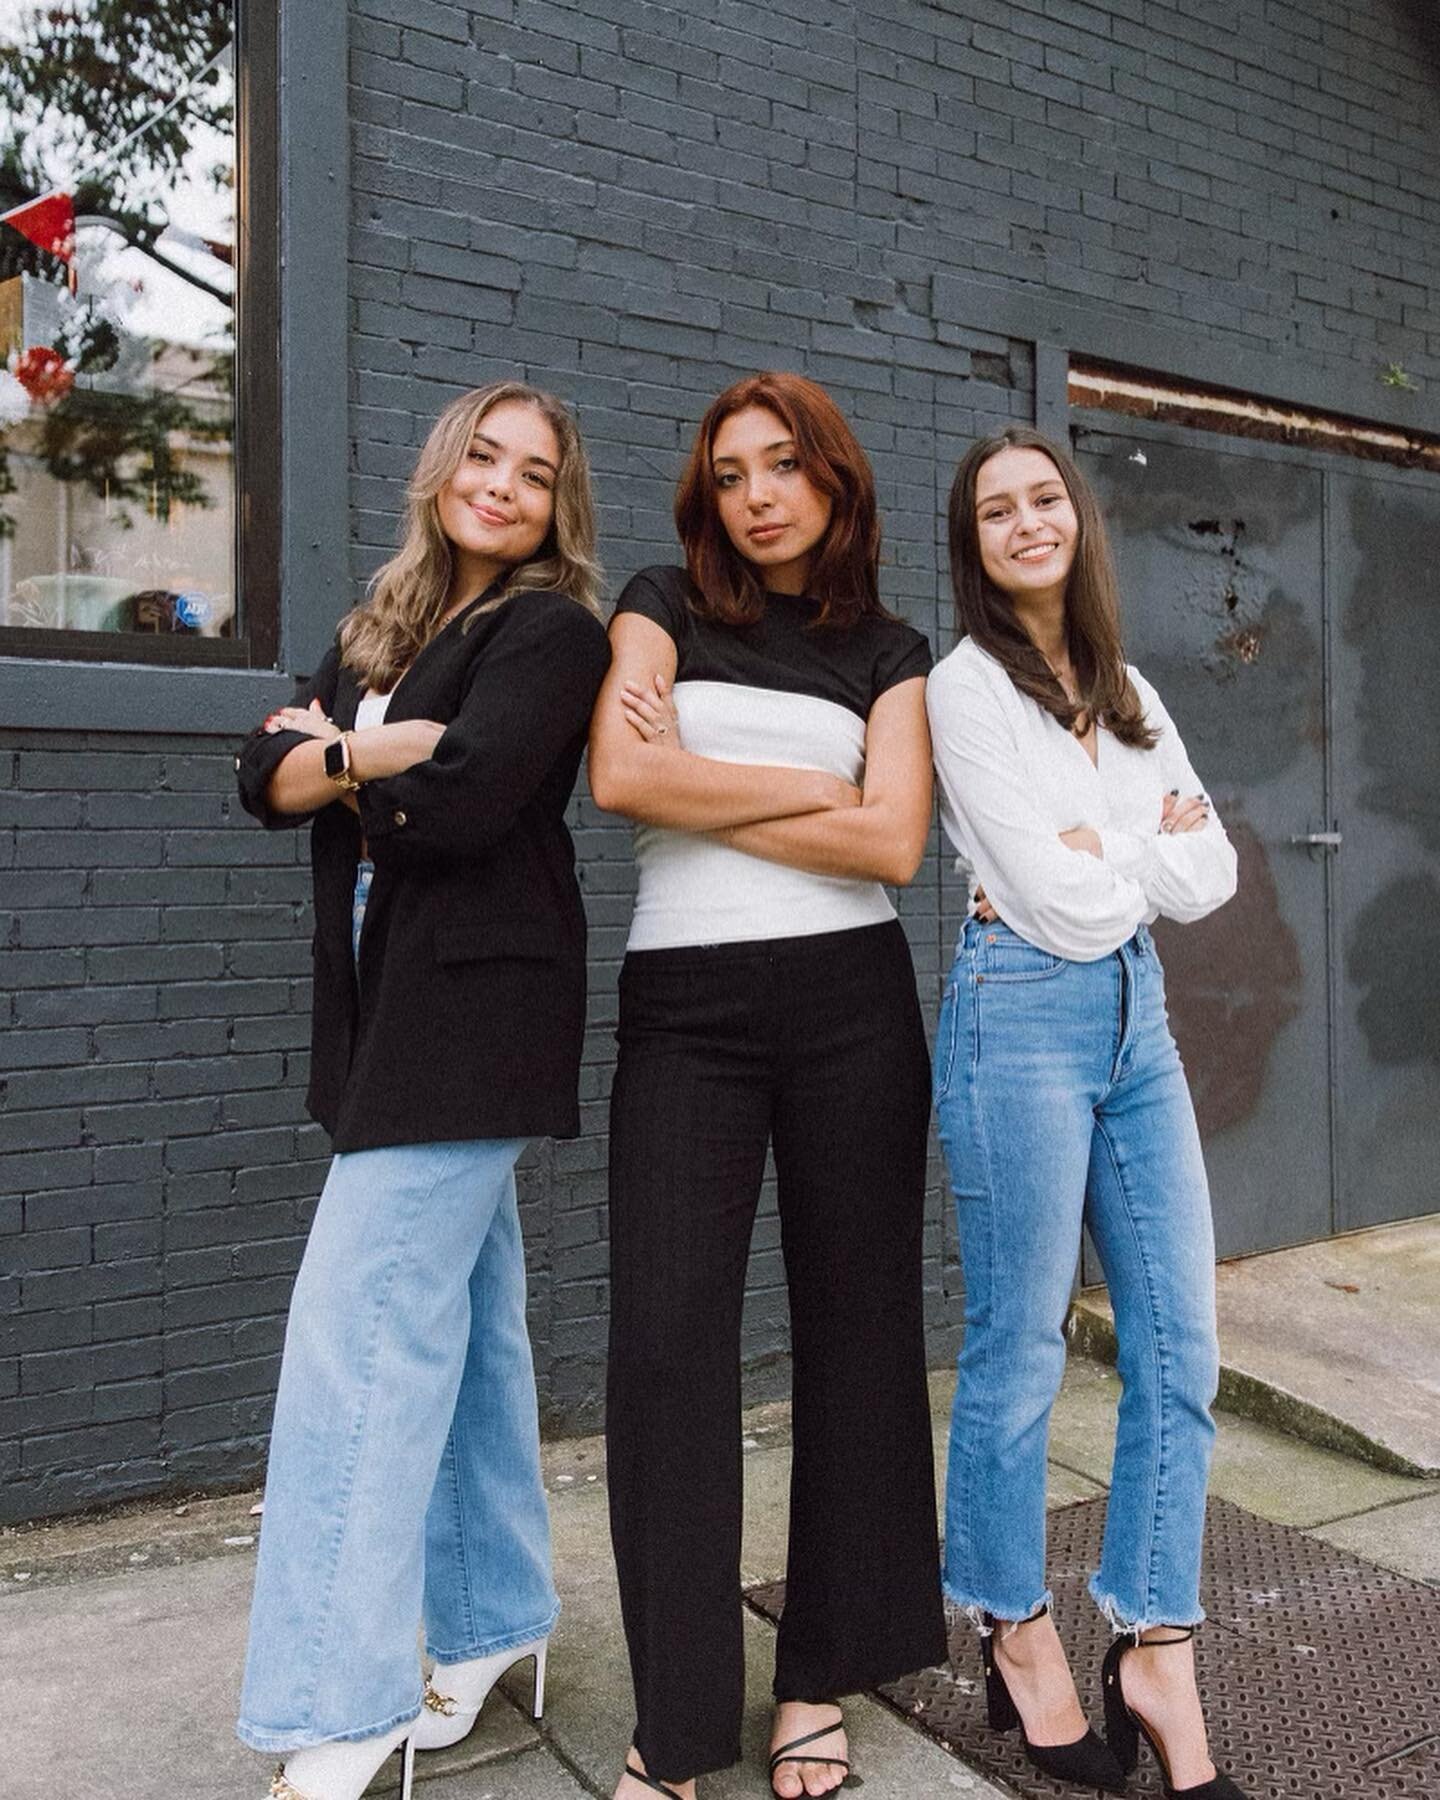 INTRODUCING OUR BIG THREE

Thank you to our Co-Editors-In-Chief @caitlinrdowning &amp; @nastasiaxx__, Creative Director @sunnyaryana, and External Director @caitlinrdowning for your efforts in leading us into a new chapter with Issue 04. 

Your visio